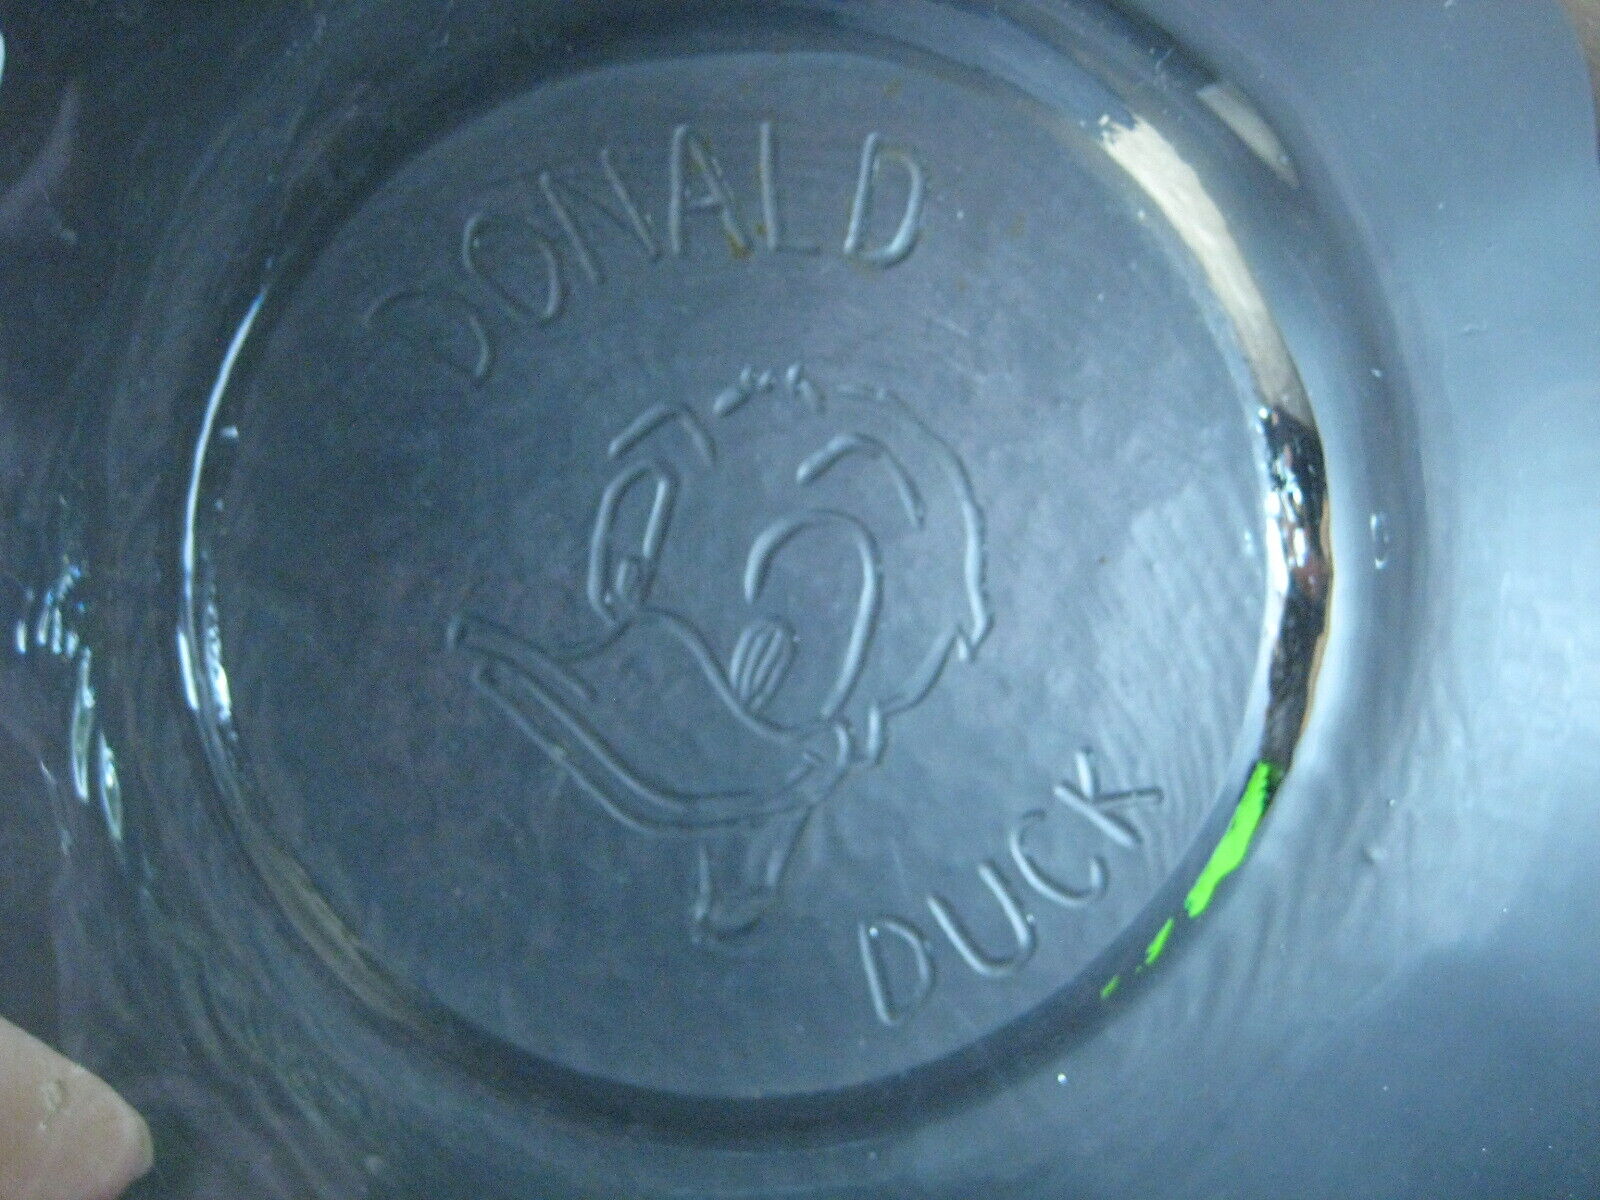 VERY RARE ❤️ VINTAGE DONALD DUCK GLASS BOWL_HANDMADE_ONE OF A KIND OOAK❤️ DISNEY